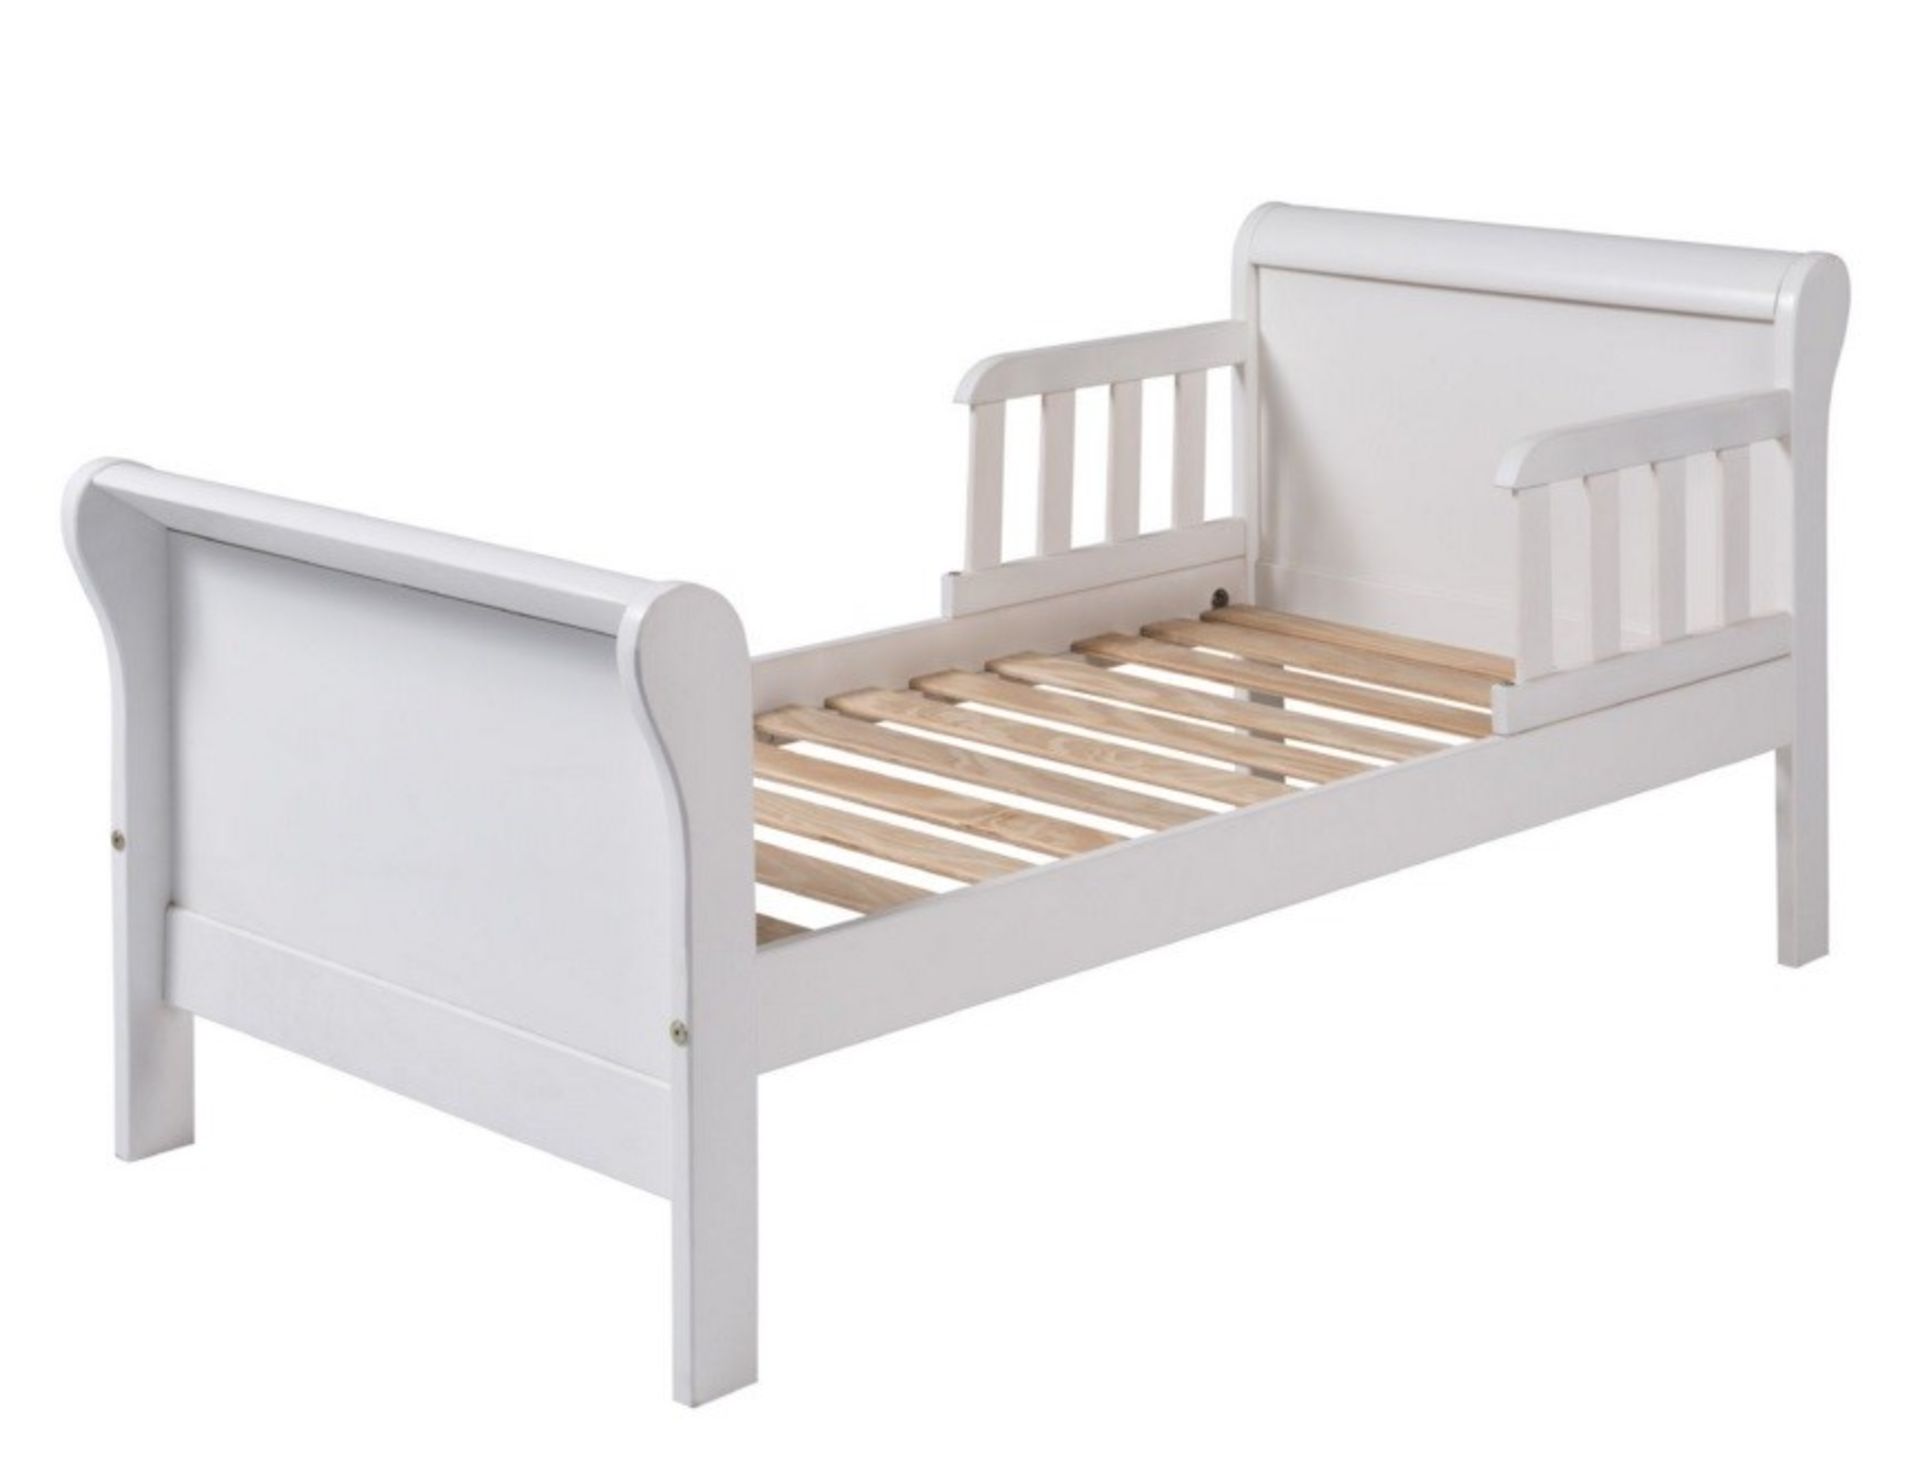 1 x Daisy Sleigh Bed Frame With Siderails - Colour: White - Solid Wood - Bedroom Nursery - Ideal For - Image 2 of 2